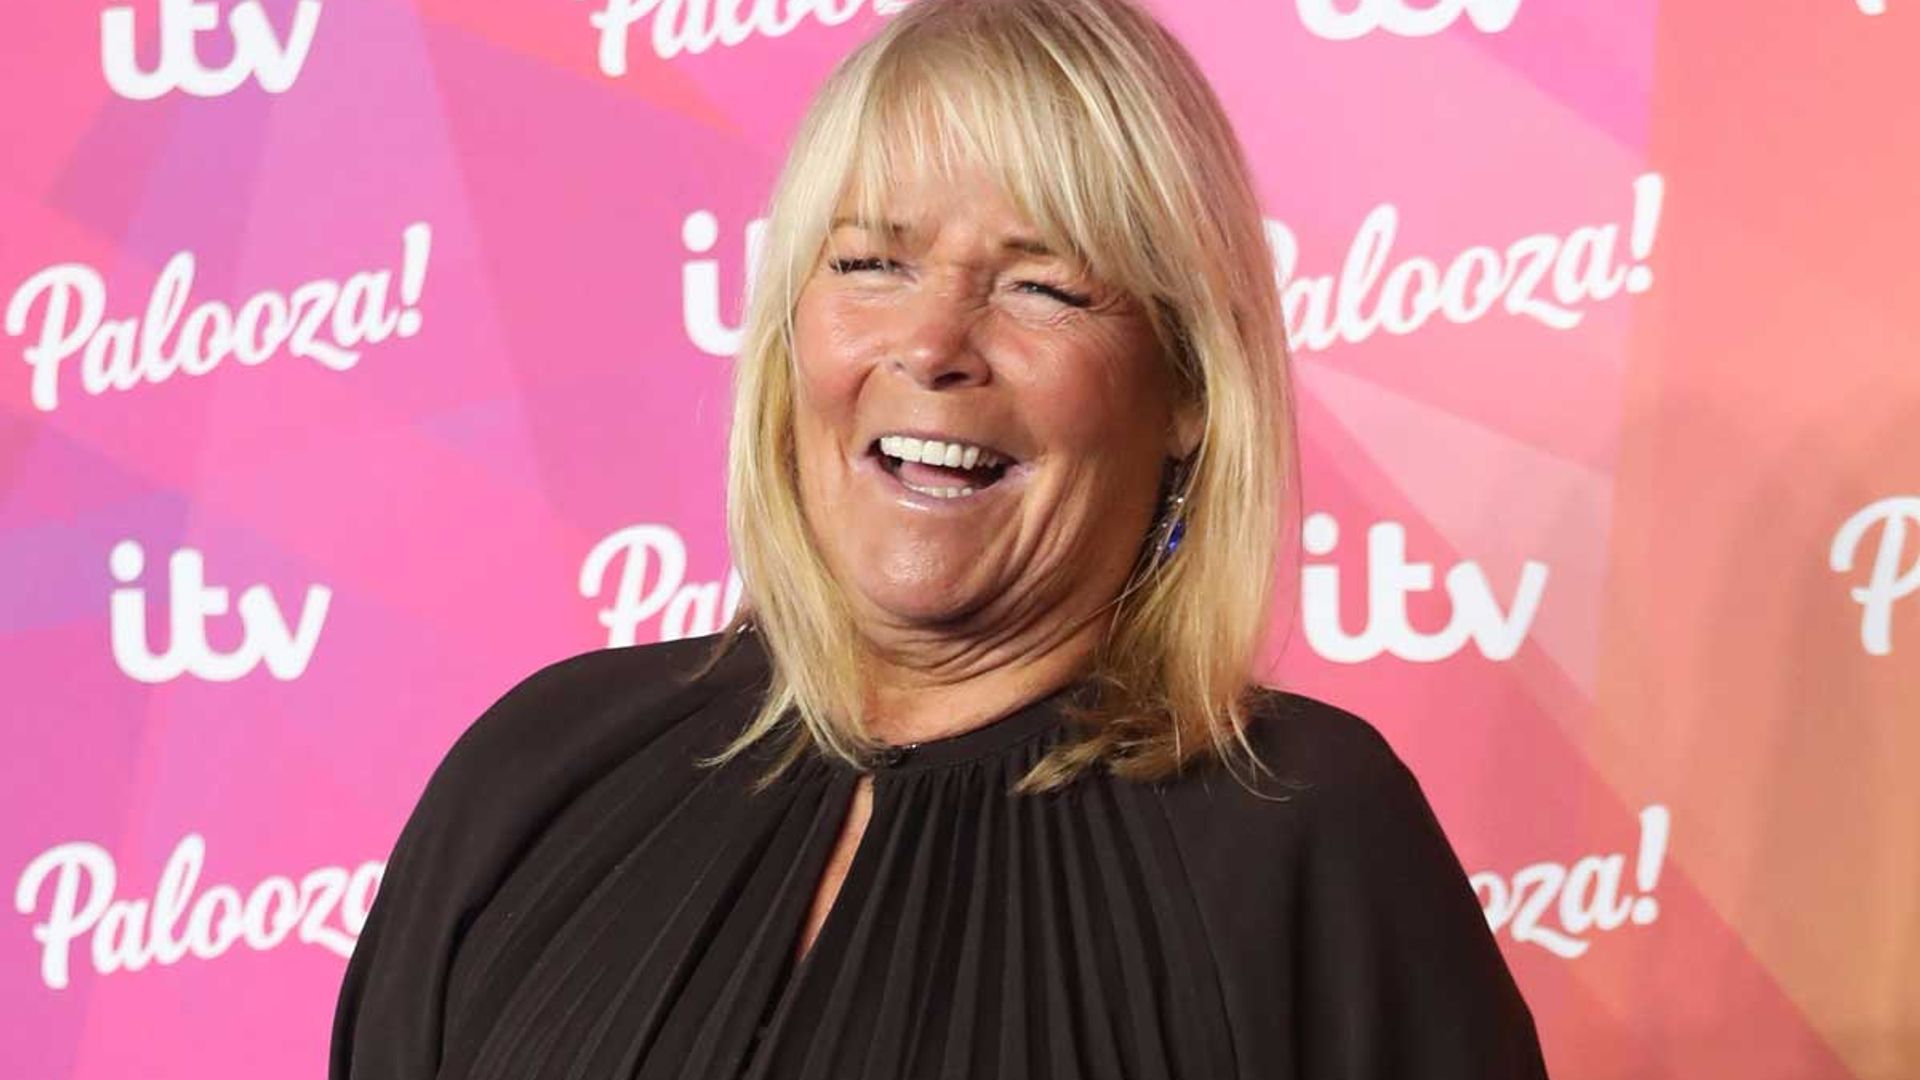 Linda Robson stuns Loose Women fans with bath photo from luxury Maldives holiday